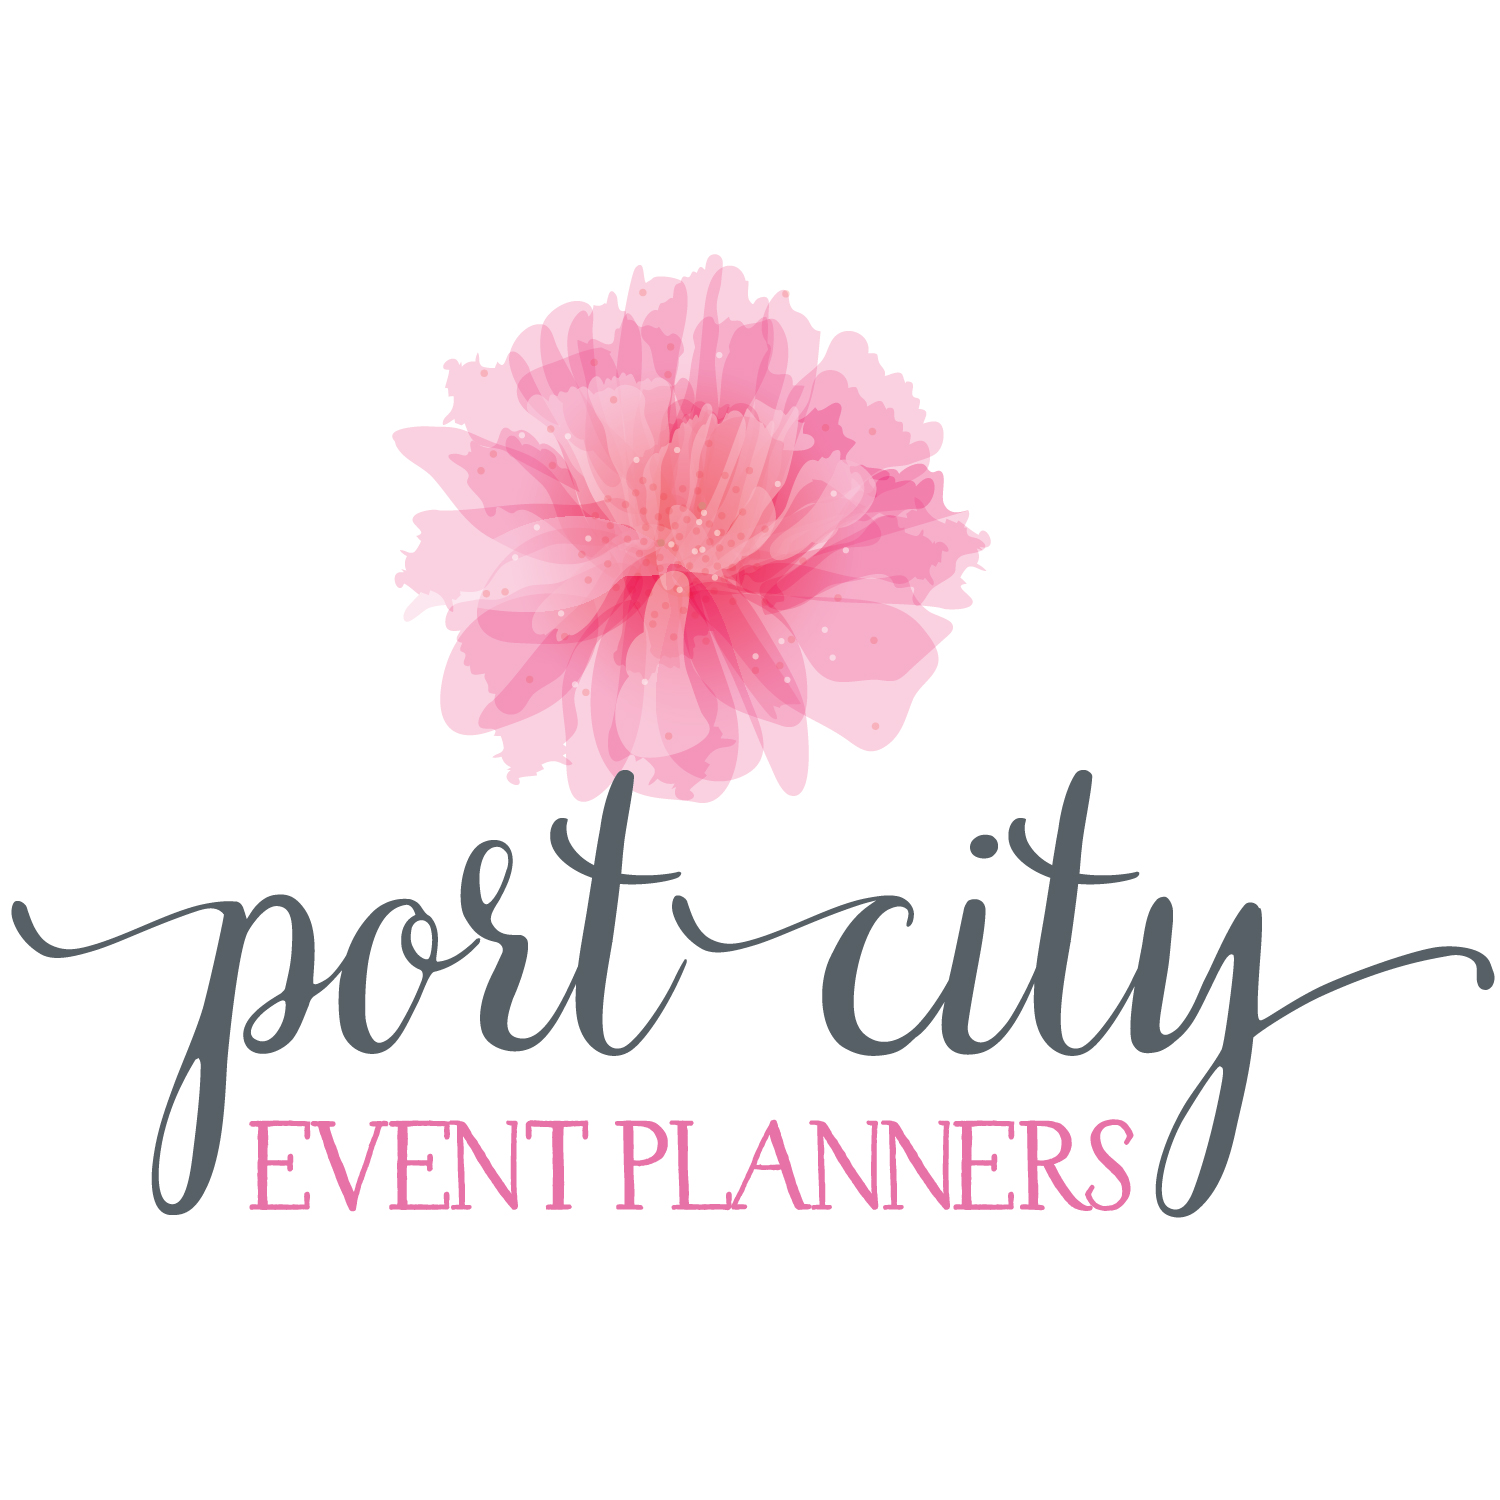 Port City Event Planners